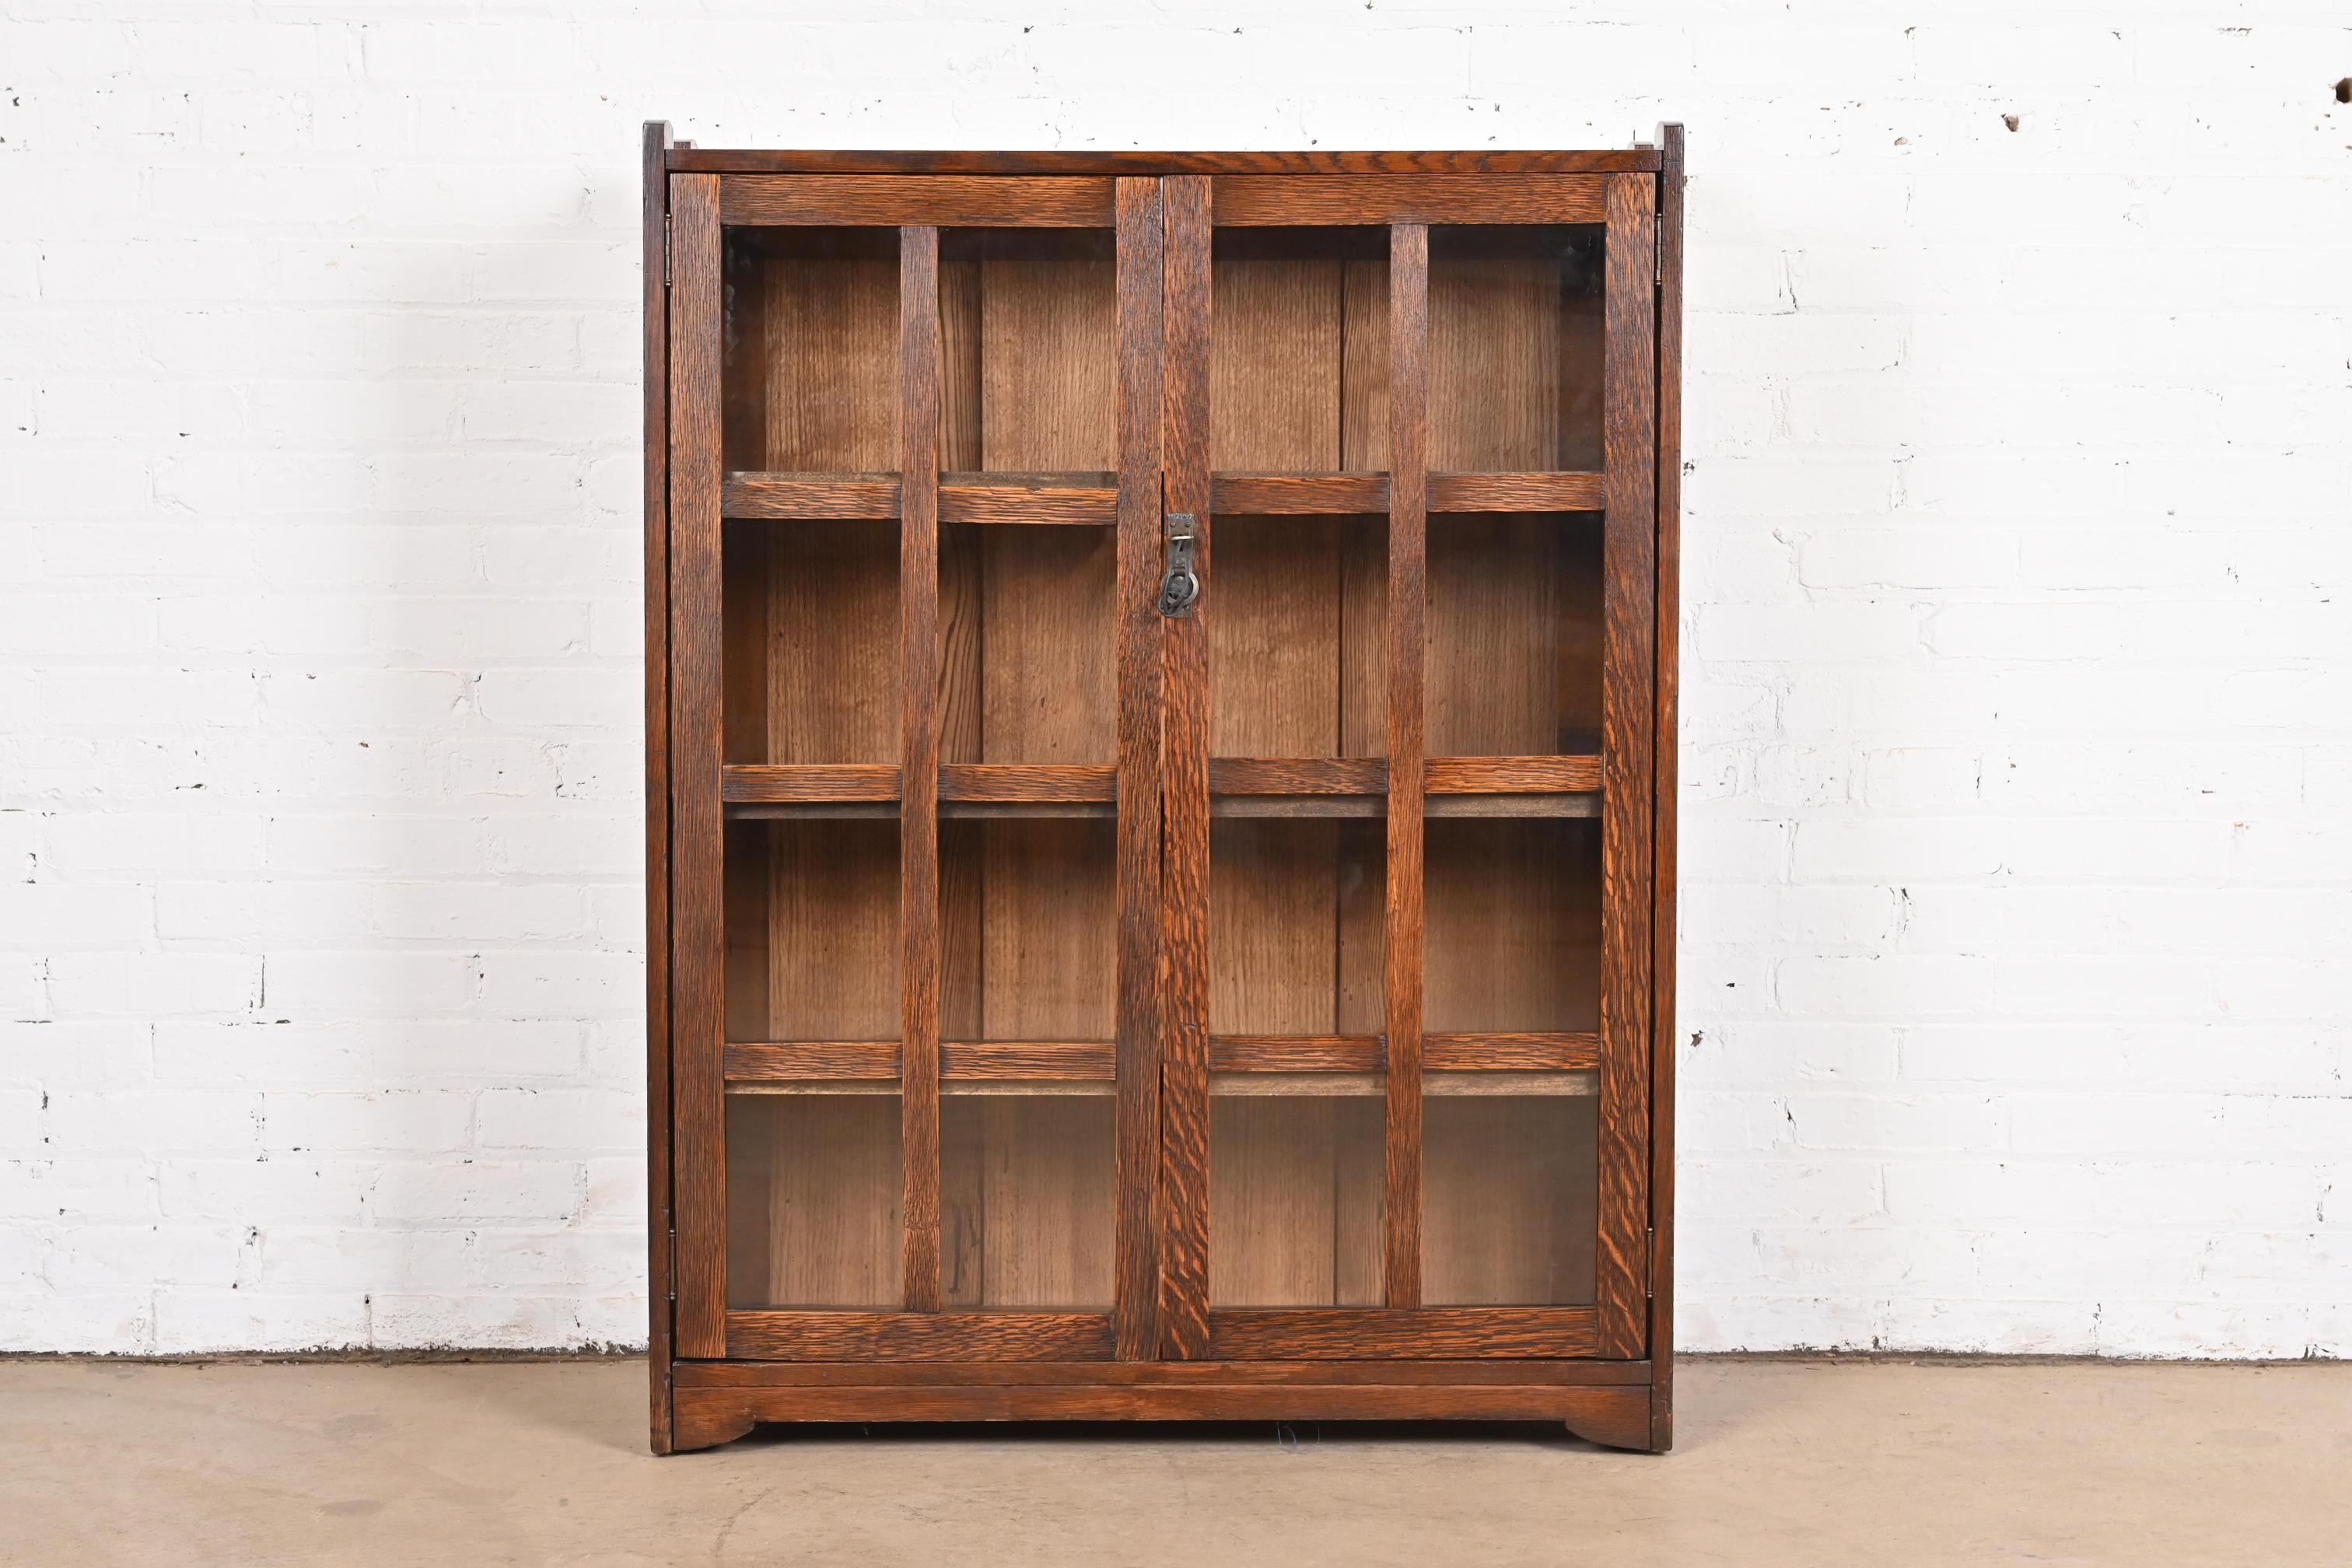 A gorgeous antique Mission or Arts & Crafts bookcase cabinet

By Stickley Brothers

USA, Circa 1900

Quarter sawn oak, with mullioned glass front doors, and original copper hardware. Cabinet locks, and key is included.

Measures: 35.75